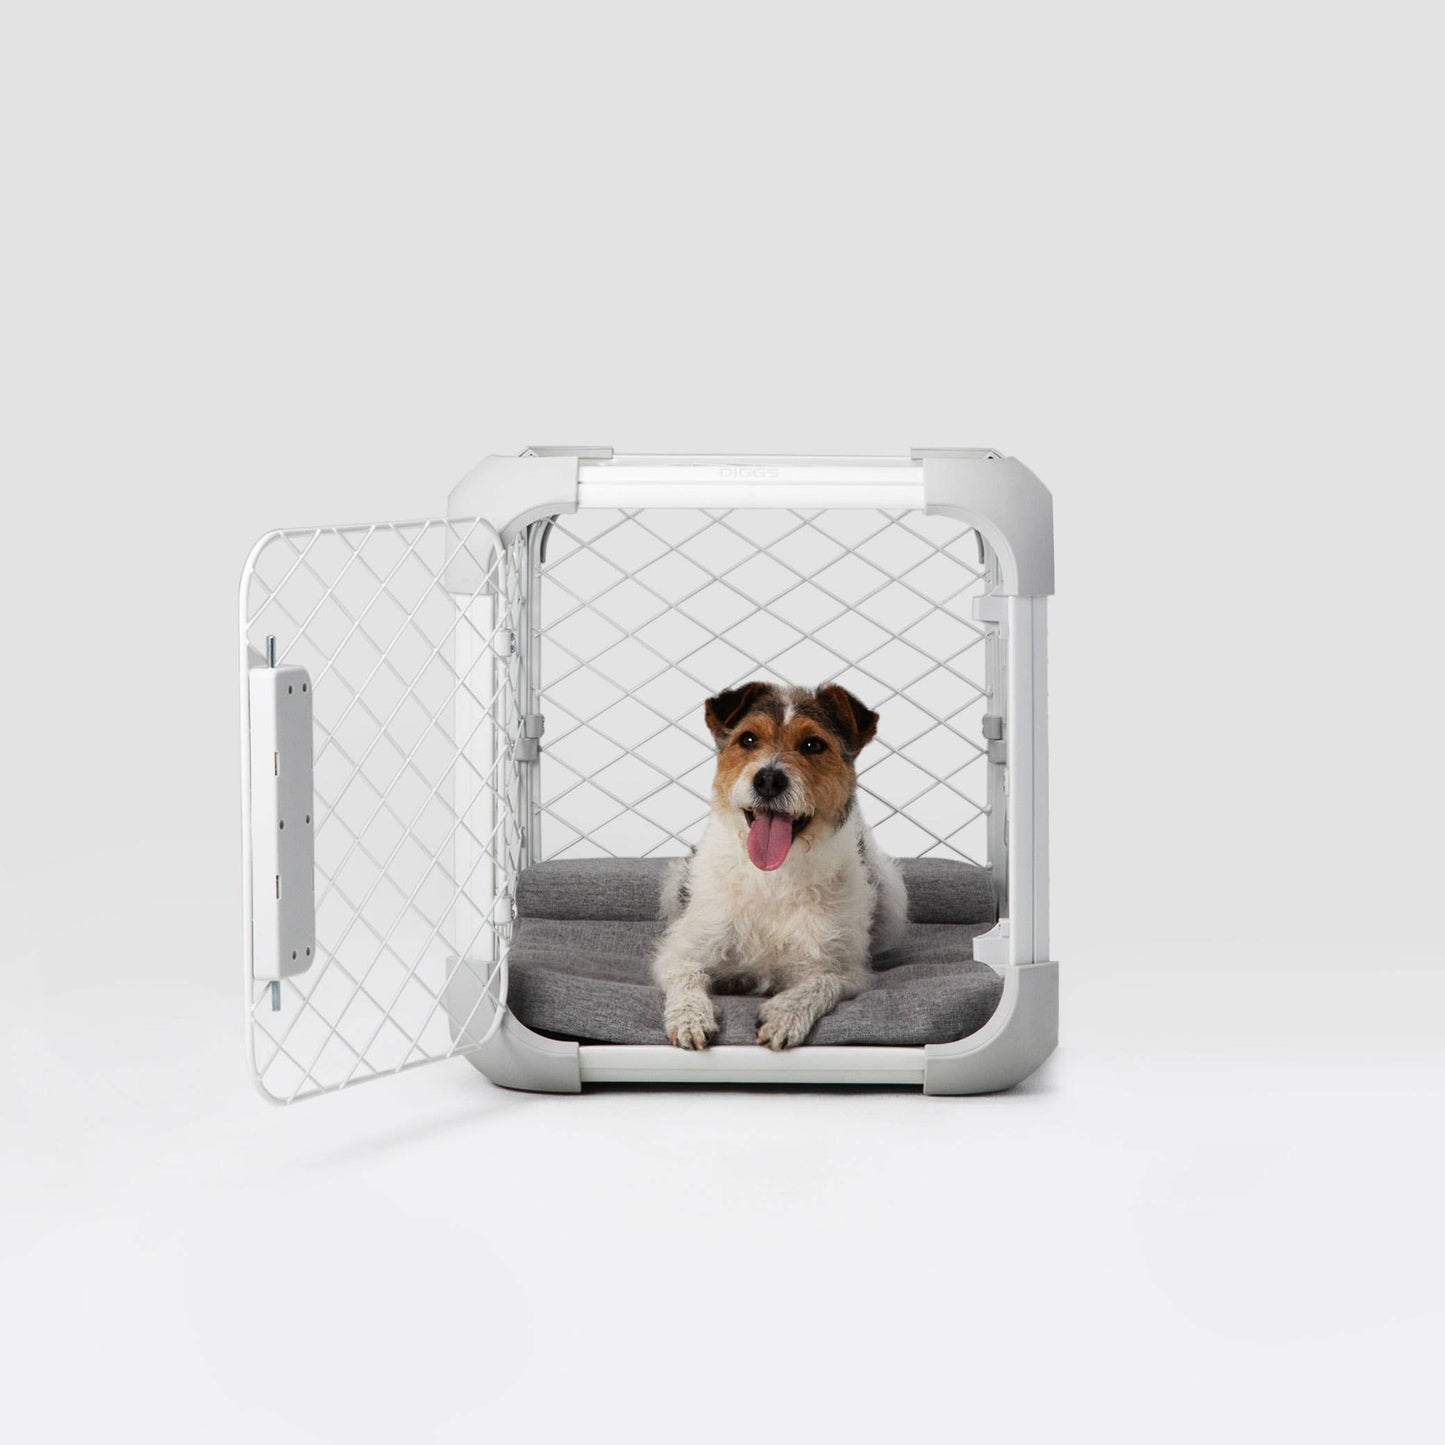 Diggs - Evolv Dog Crate 24" Image